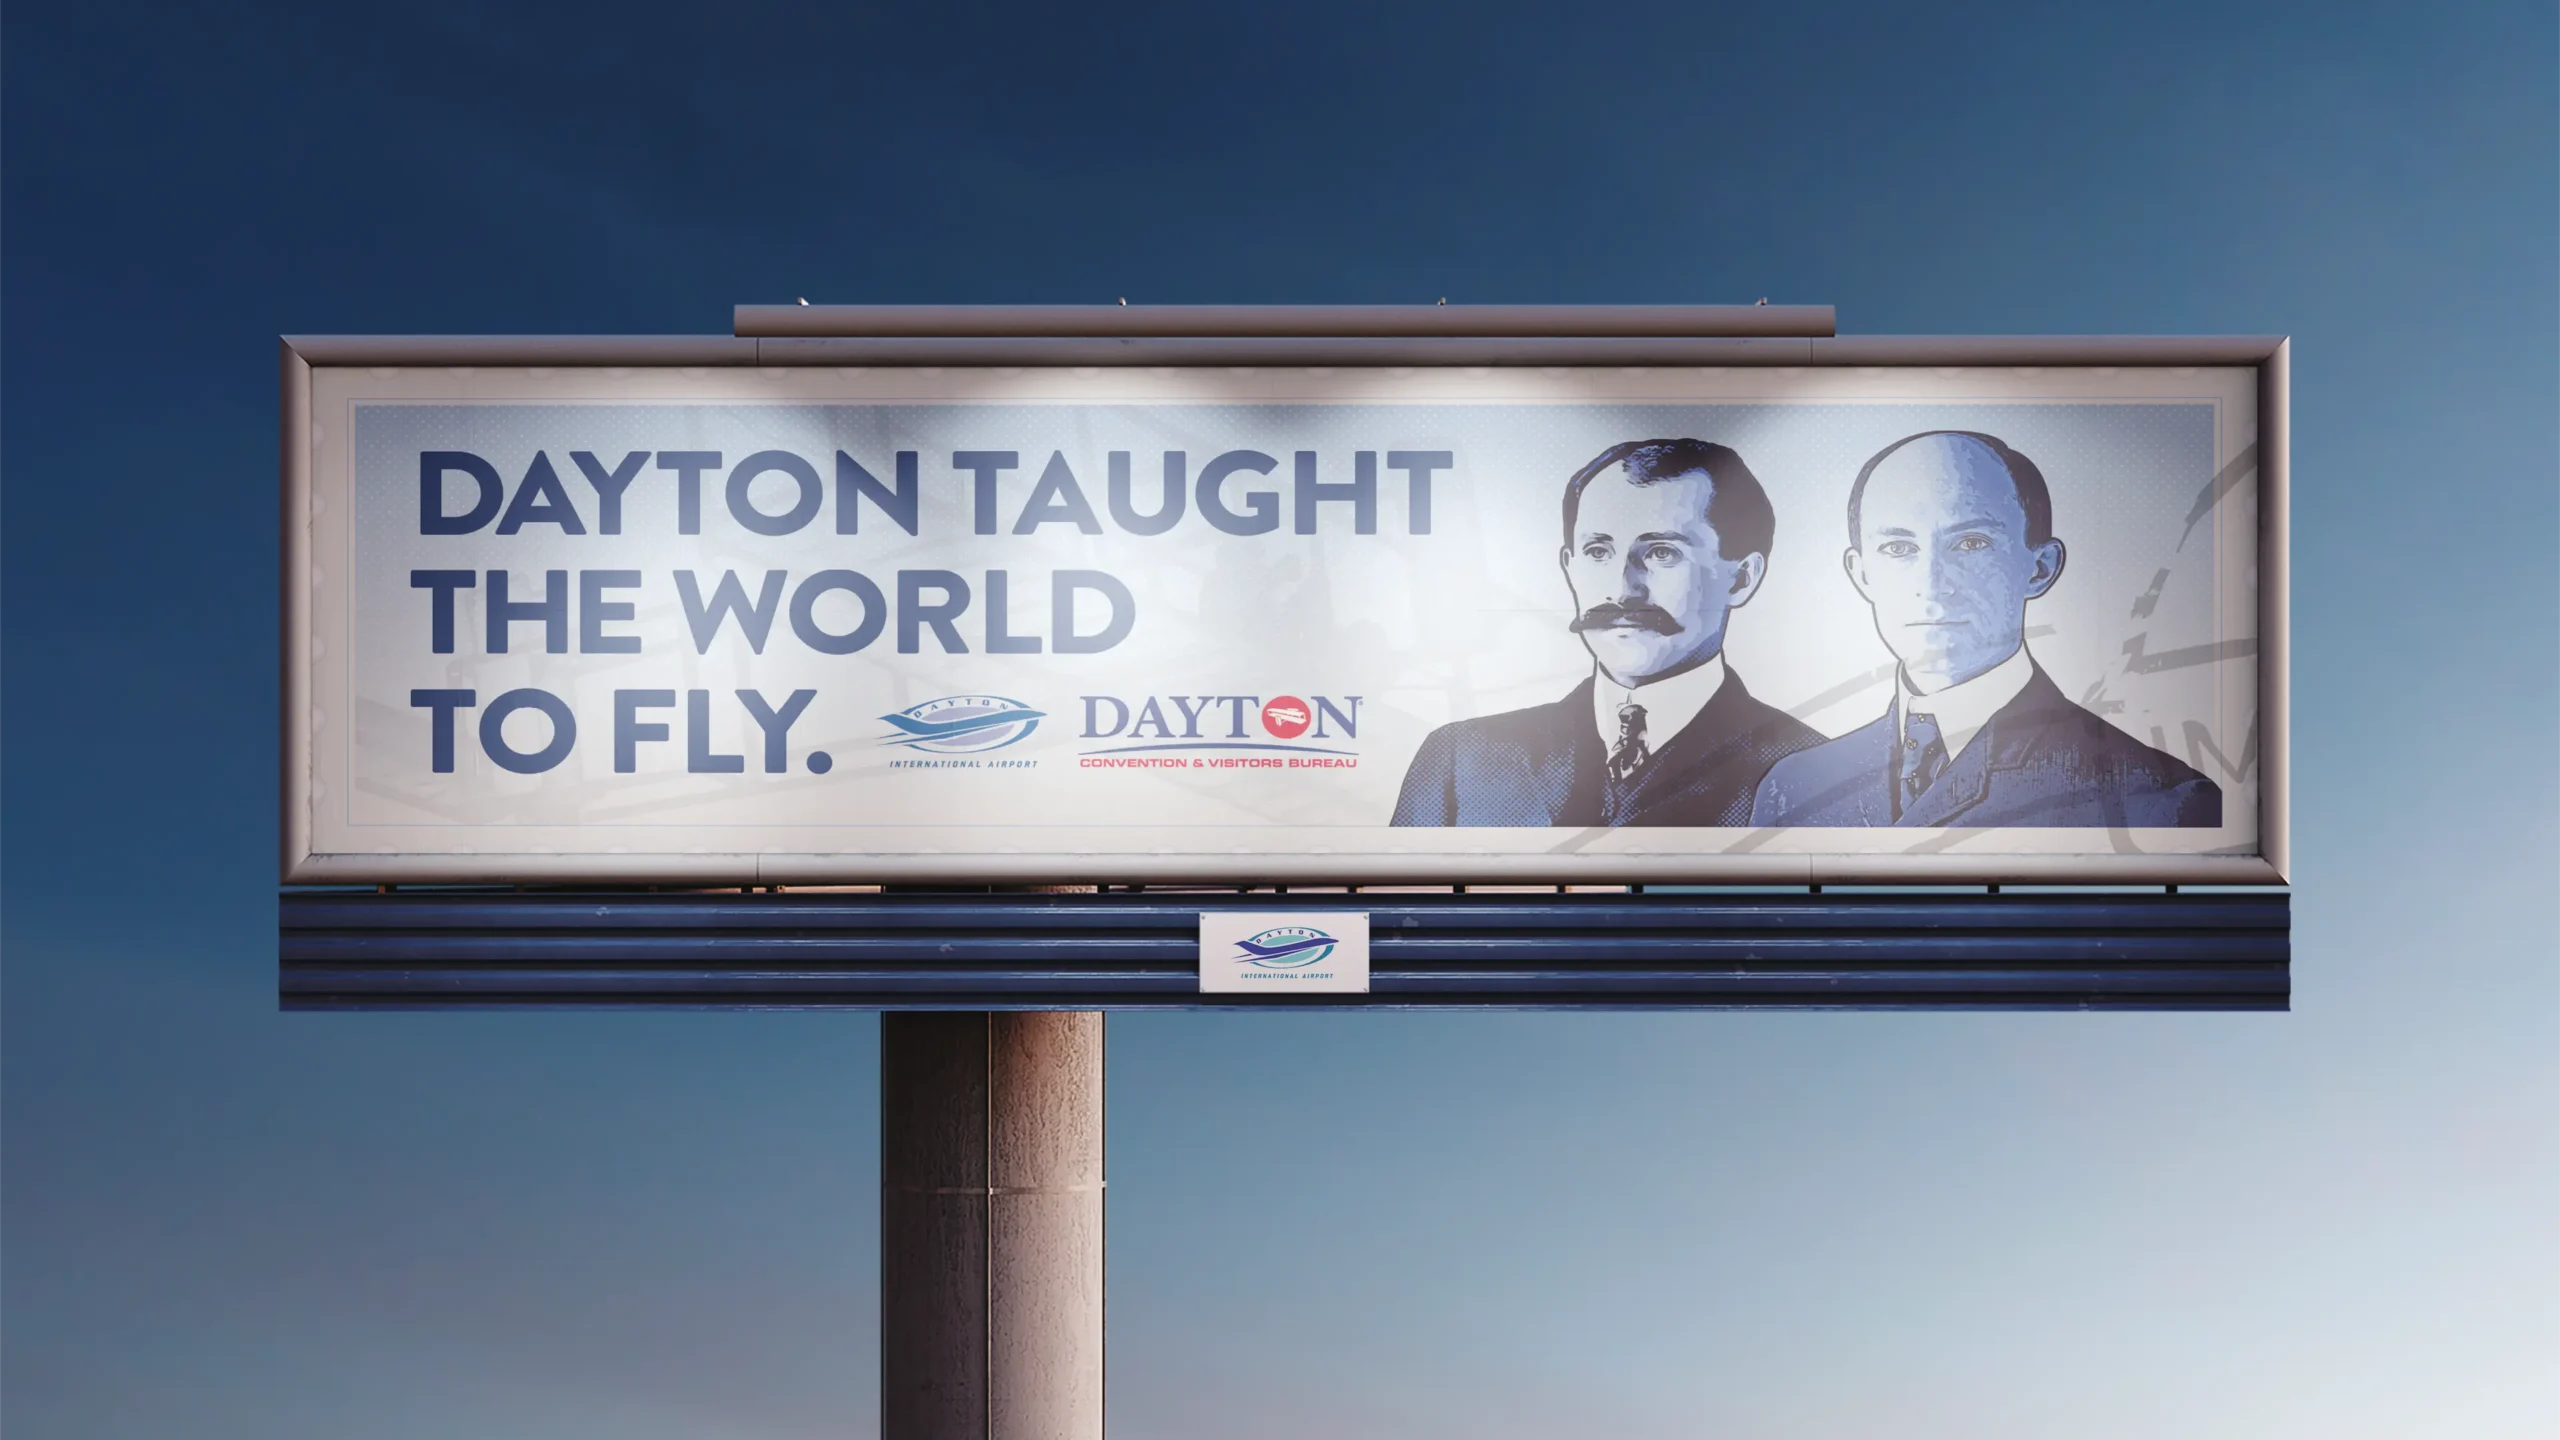 Billboard for Dayton International Airport with the writing "Dayton taught the world to fly" and a picture of Orville and Wilbur Wright